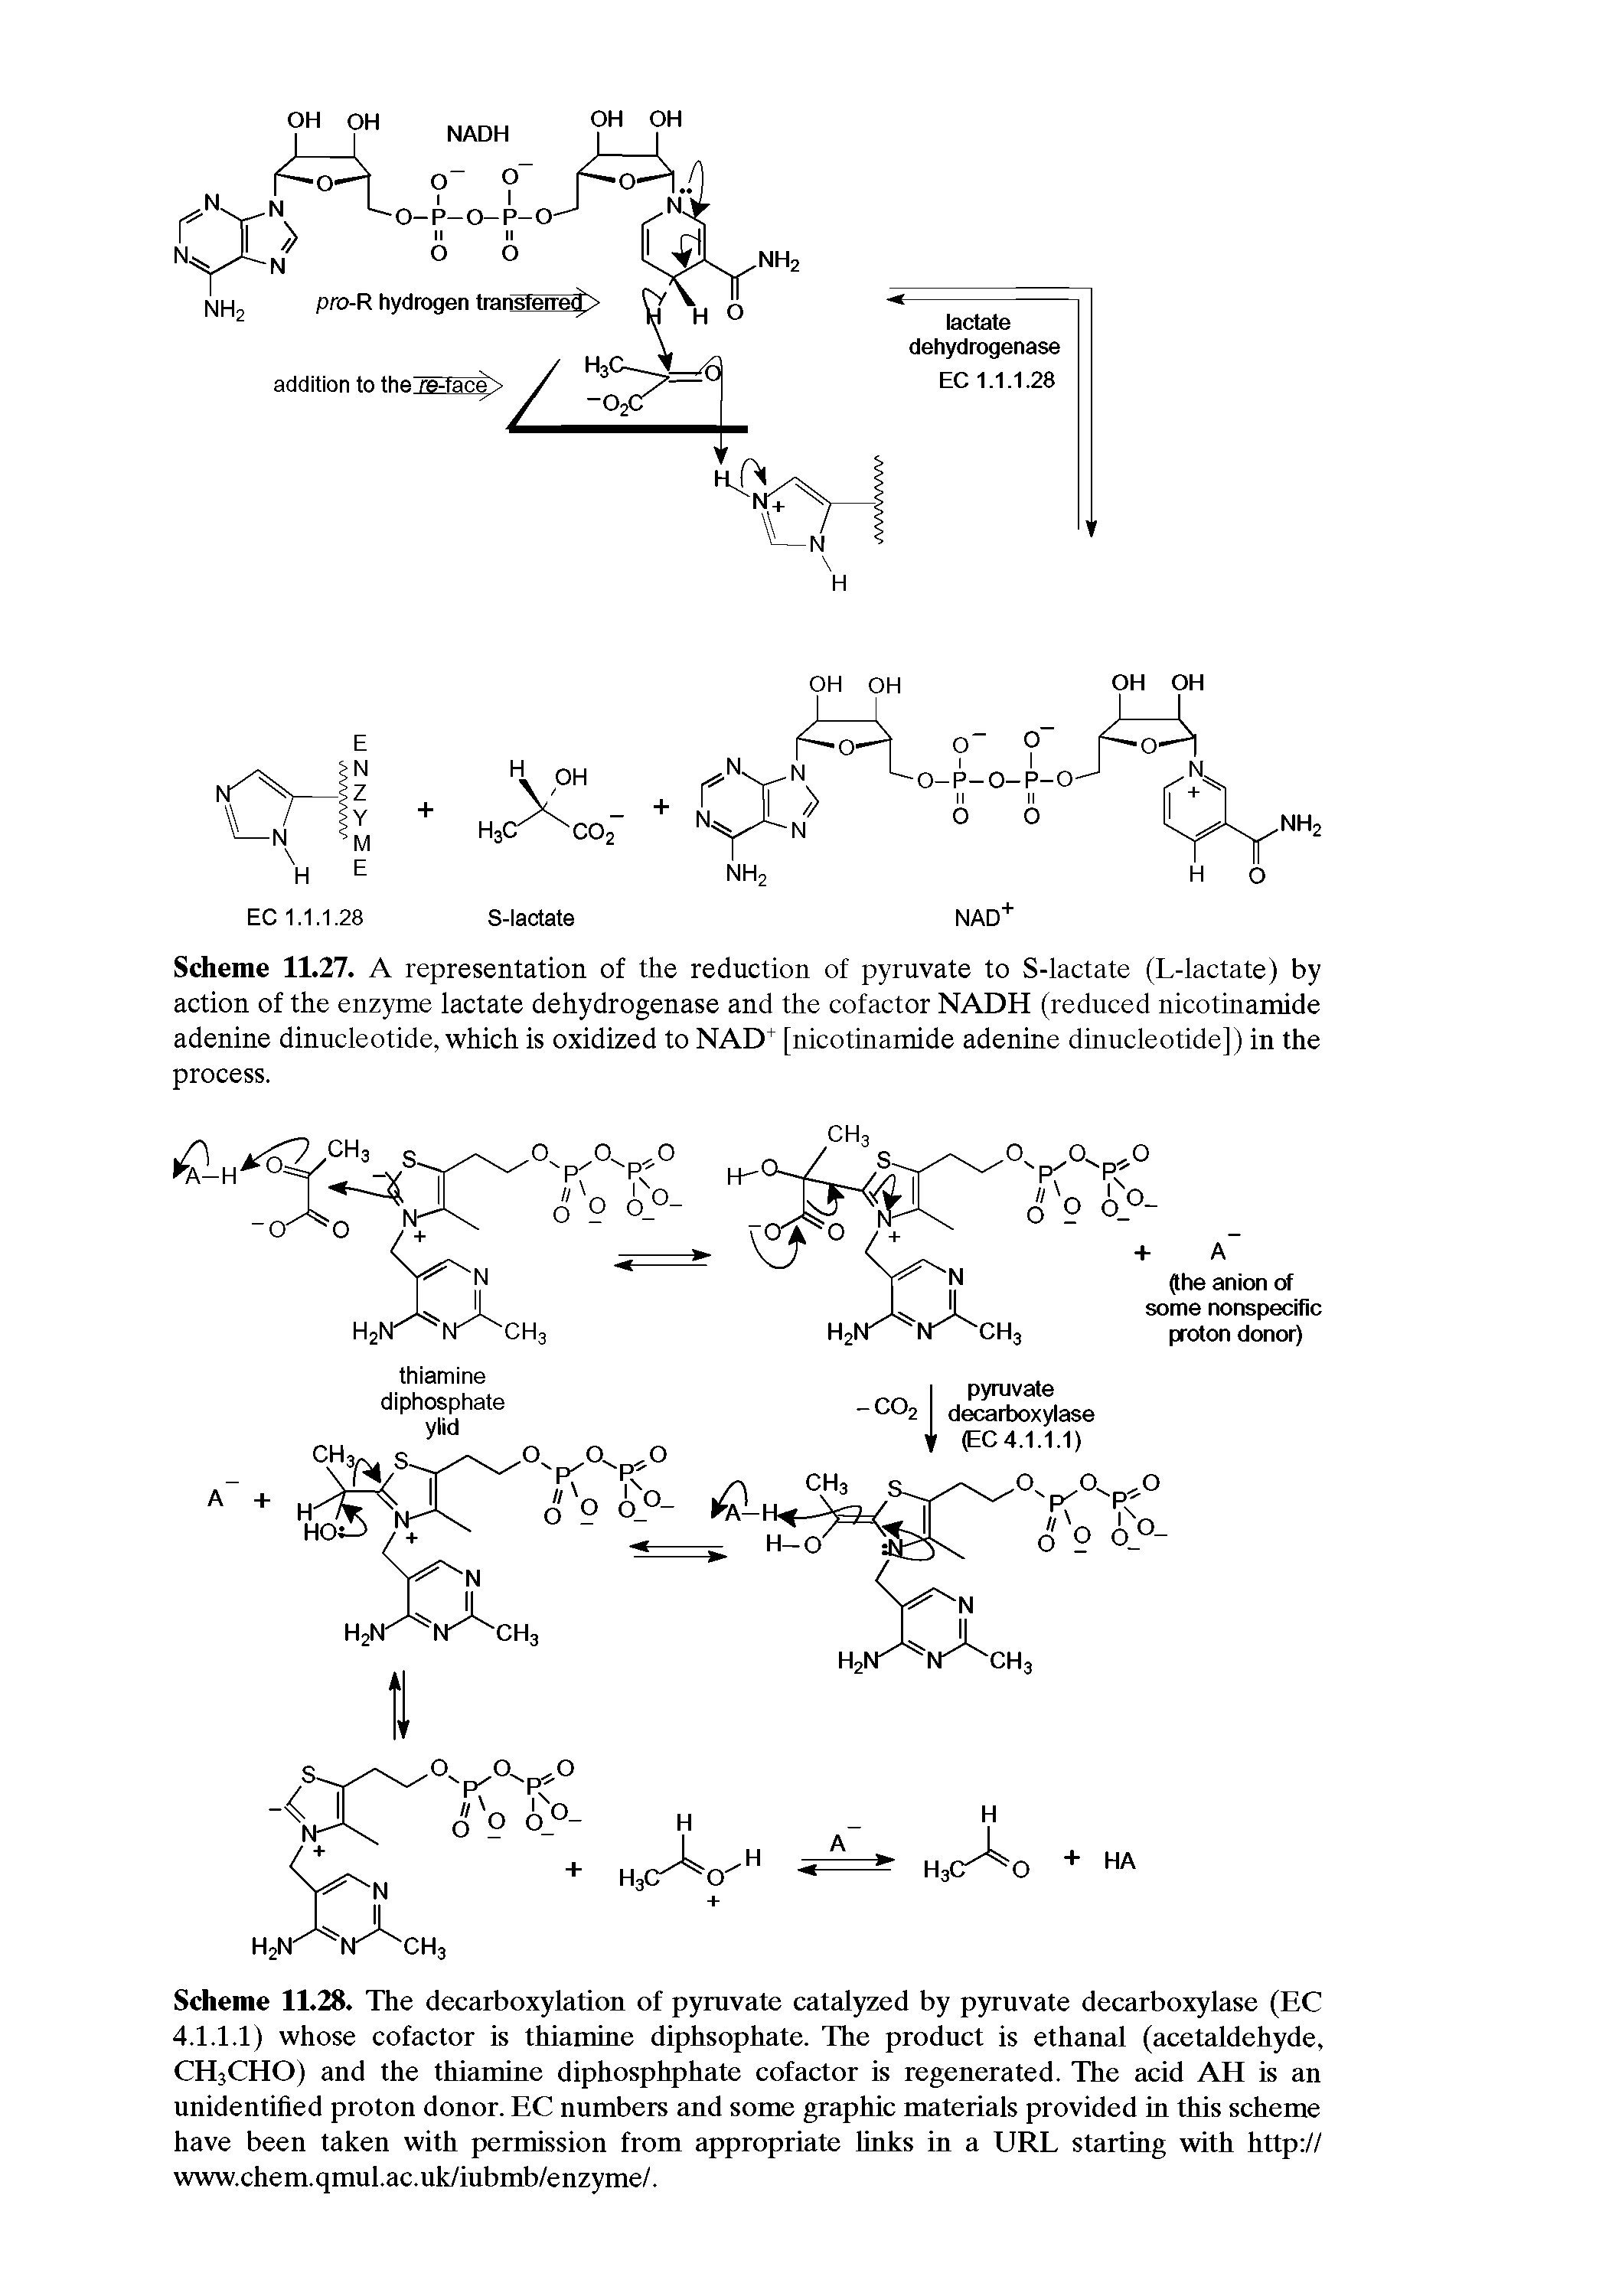 Scheme 11.28. The decarboxylation of pyruvate catalyzed by pyruvate decarboxylase (EC 4.1.1.1) whose cofactor is thiamine diphsophate. The product is ethanal (acetaldehyde, CHaCHO) and the thiamine diphosphphate cofactor is regenerated. The acid AH is an unidentified proton donor. EC numbers and some graphic materials provided in this scheme have been taken with permission from appropriate links in a URL starting with http // www.chem.qmul.ac.uk/iubmb/enzyme/.